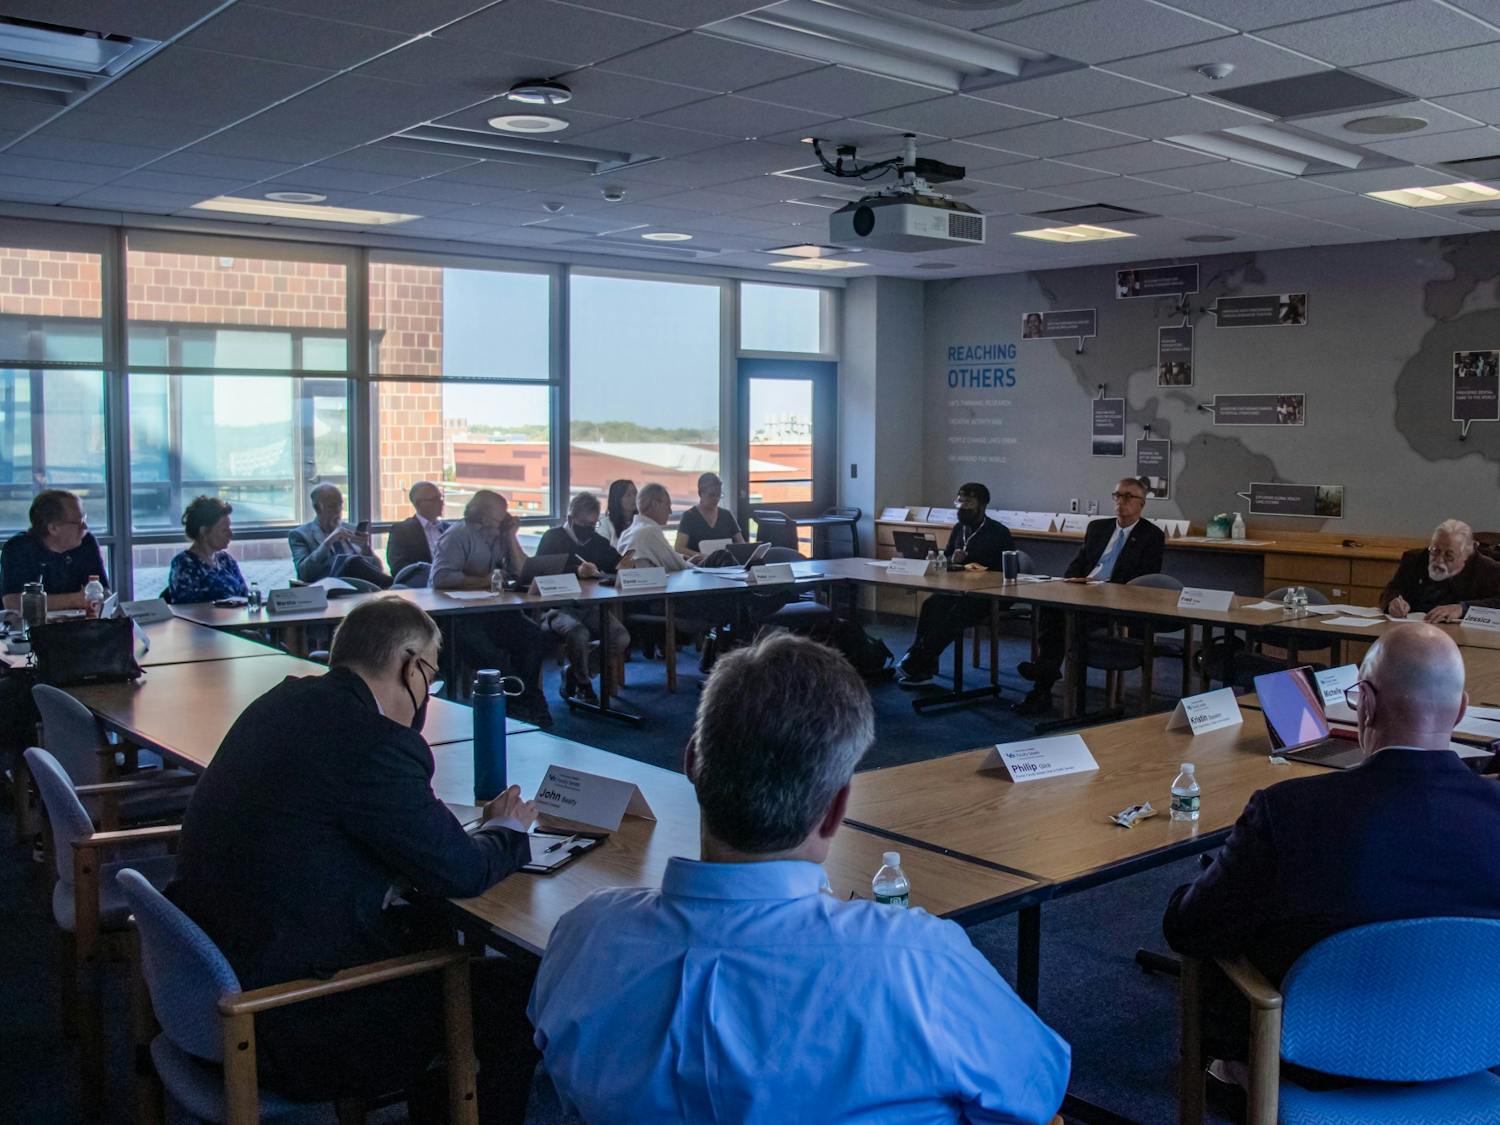 The Faculty Senate Executive Committee voted unanimously in favor of a resolution that would implement a two-day fall break during the 2023-24 academic year.